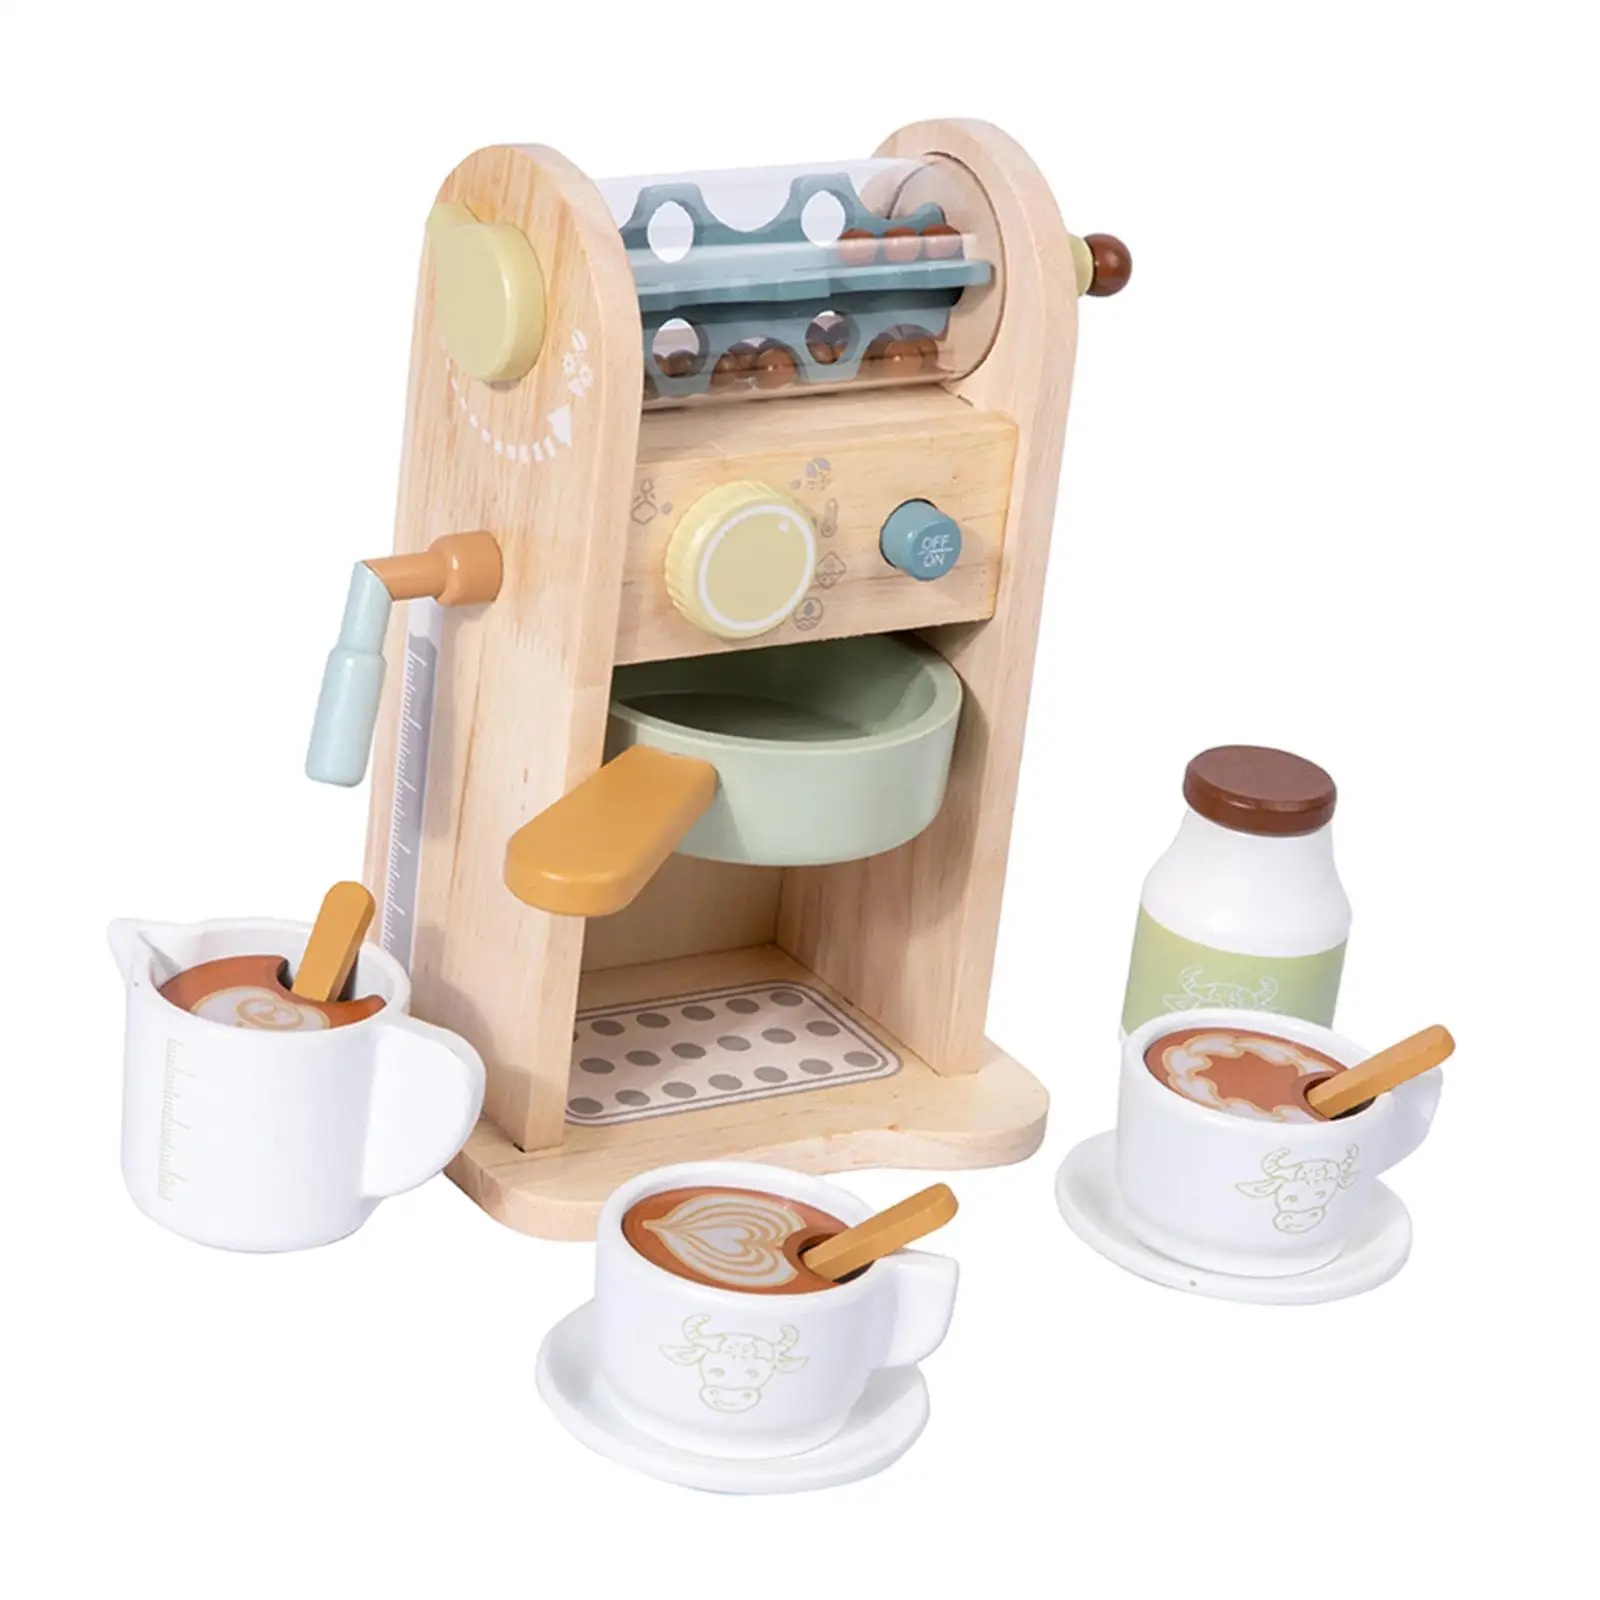 Child Coffee Maker Set Upgraded Toy Coffee Set for Children Birthday Gifts